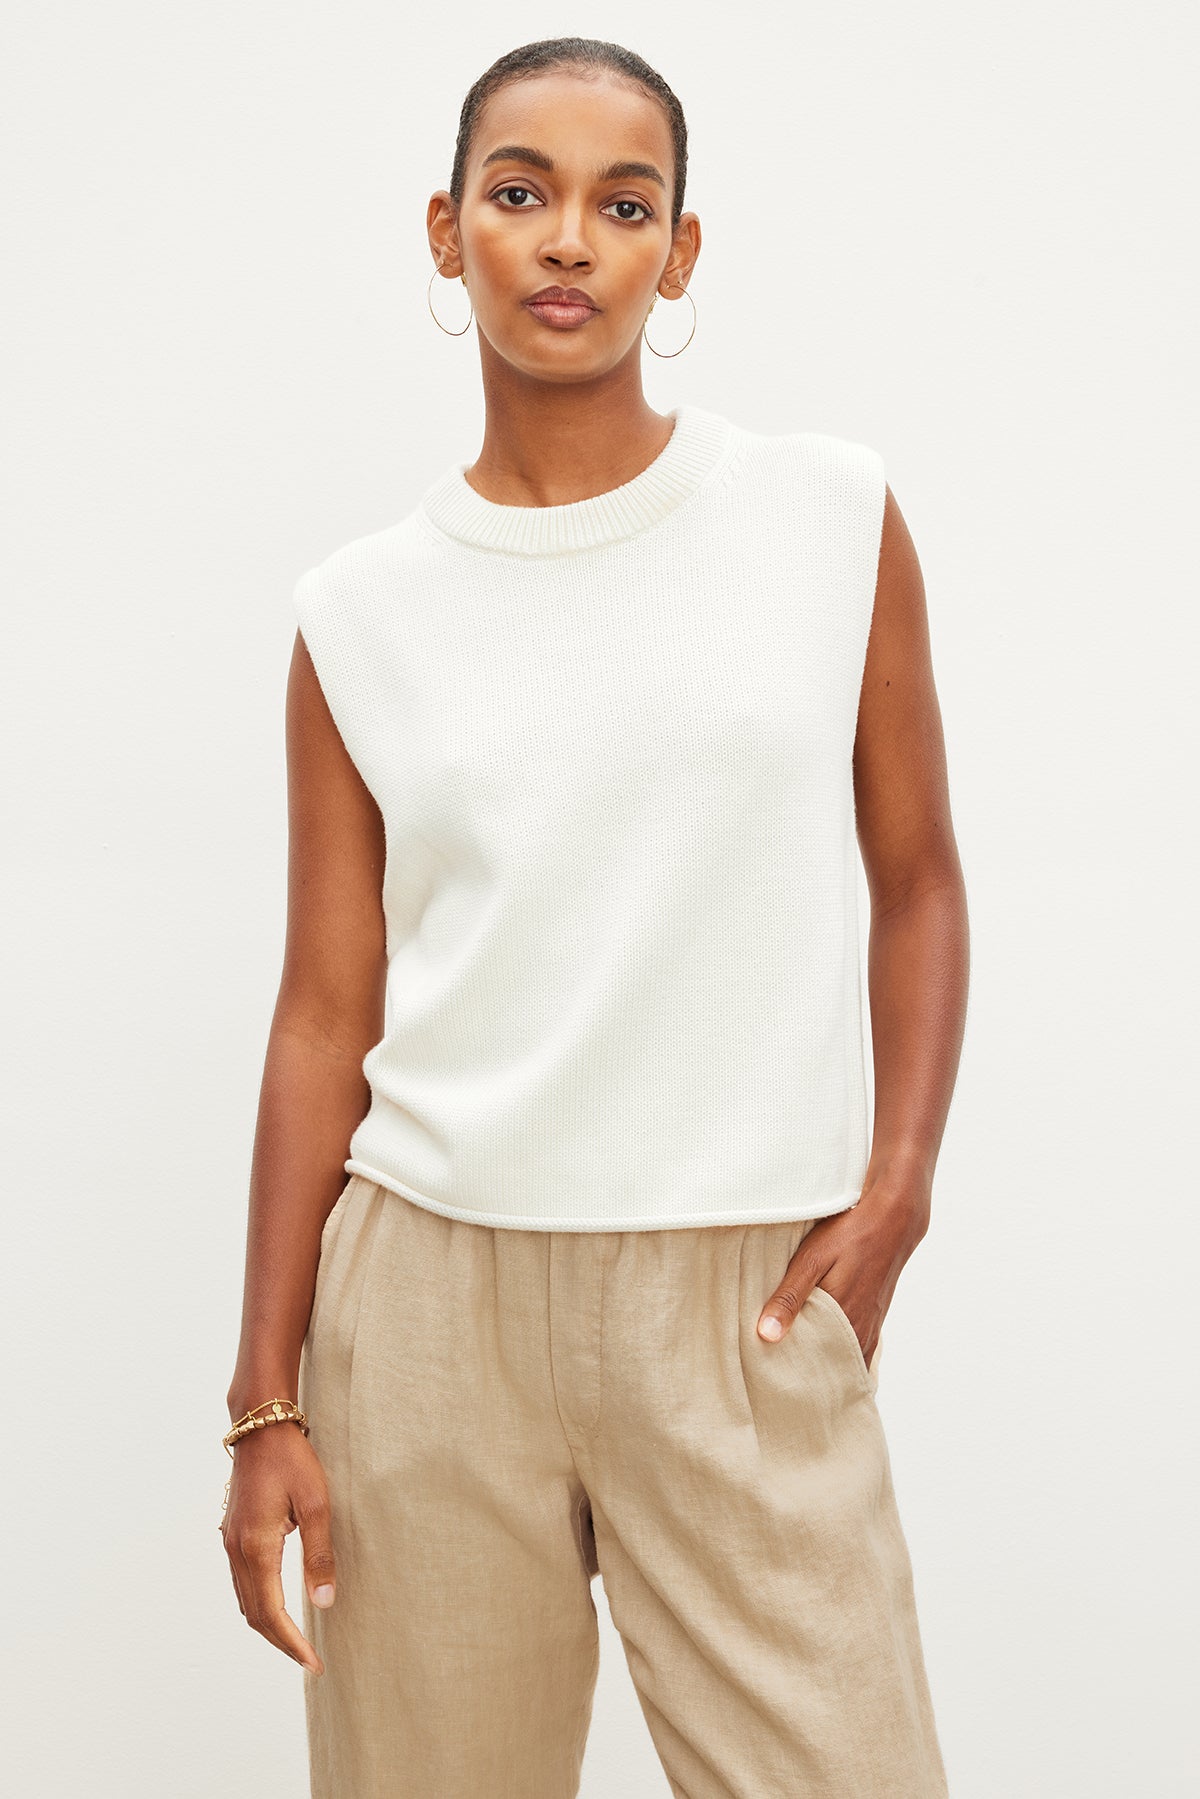 Cotton Cashmere 101: A Must For Everyone This Summer